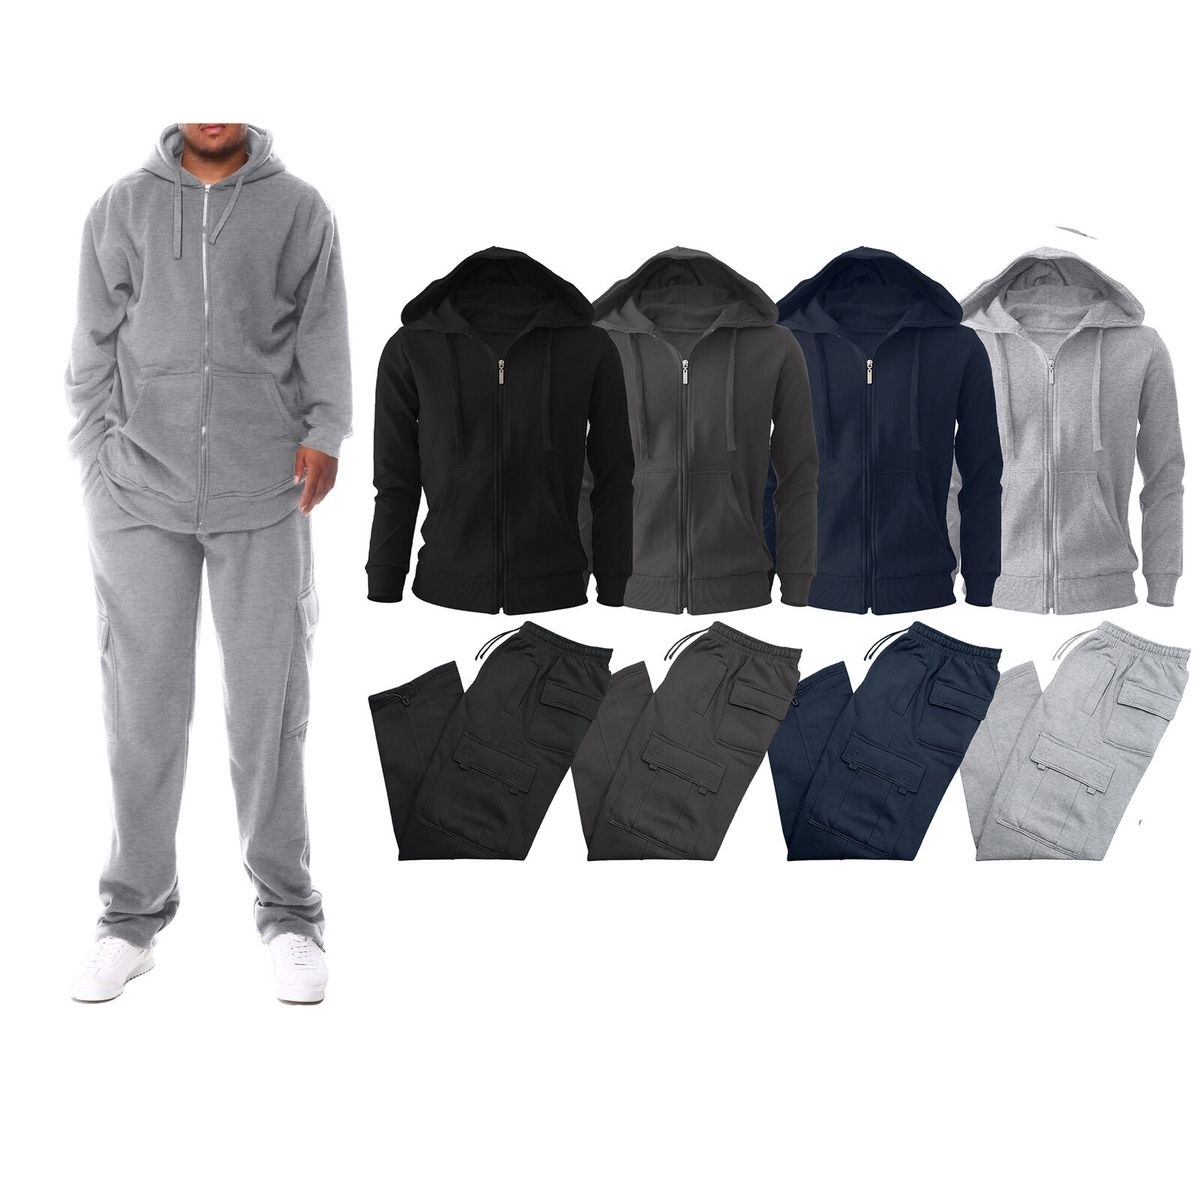 Multi-Pack: Men's Big & Tall Winter Warm Athletic Active Cozy Fleece Lined Multi-Pocket Full Zip Up Cargo Tracksuit - Charcoal, 1-pack, Smal